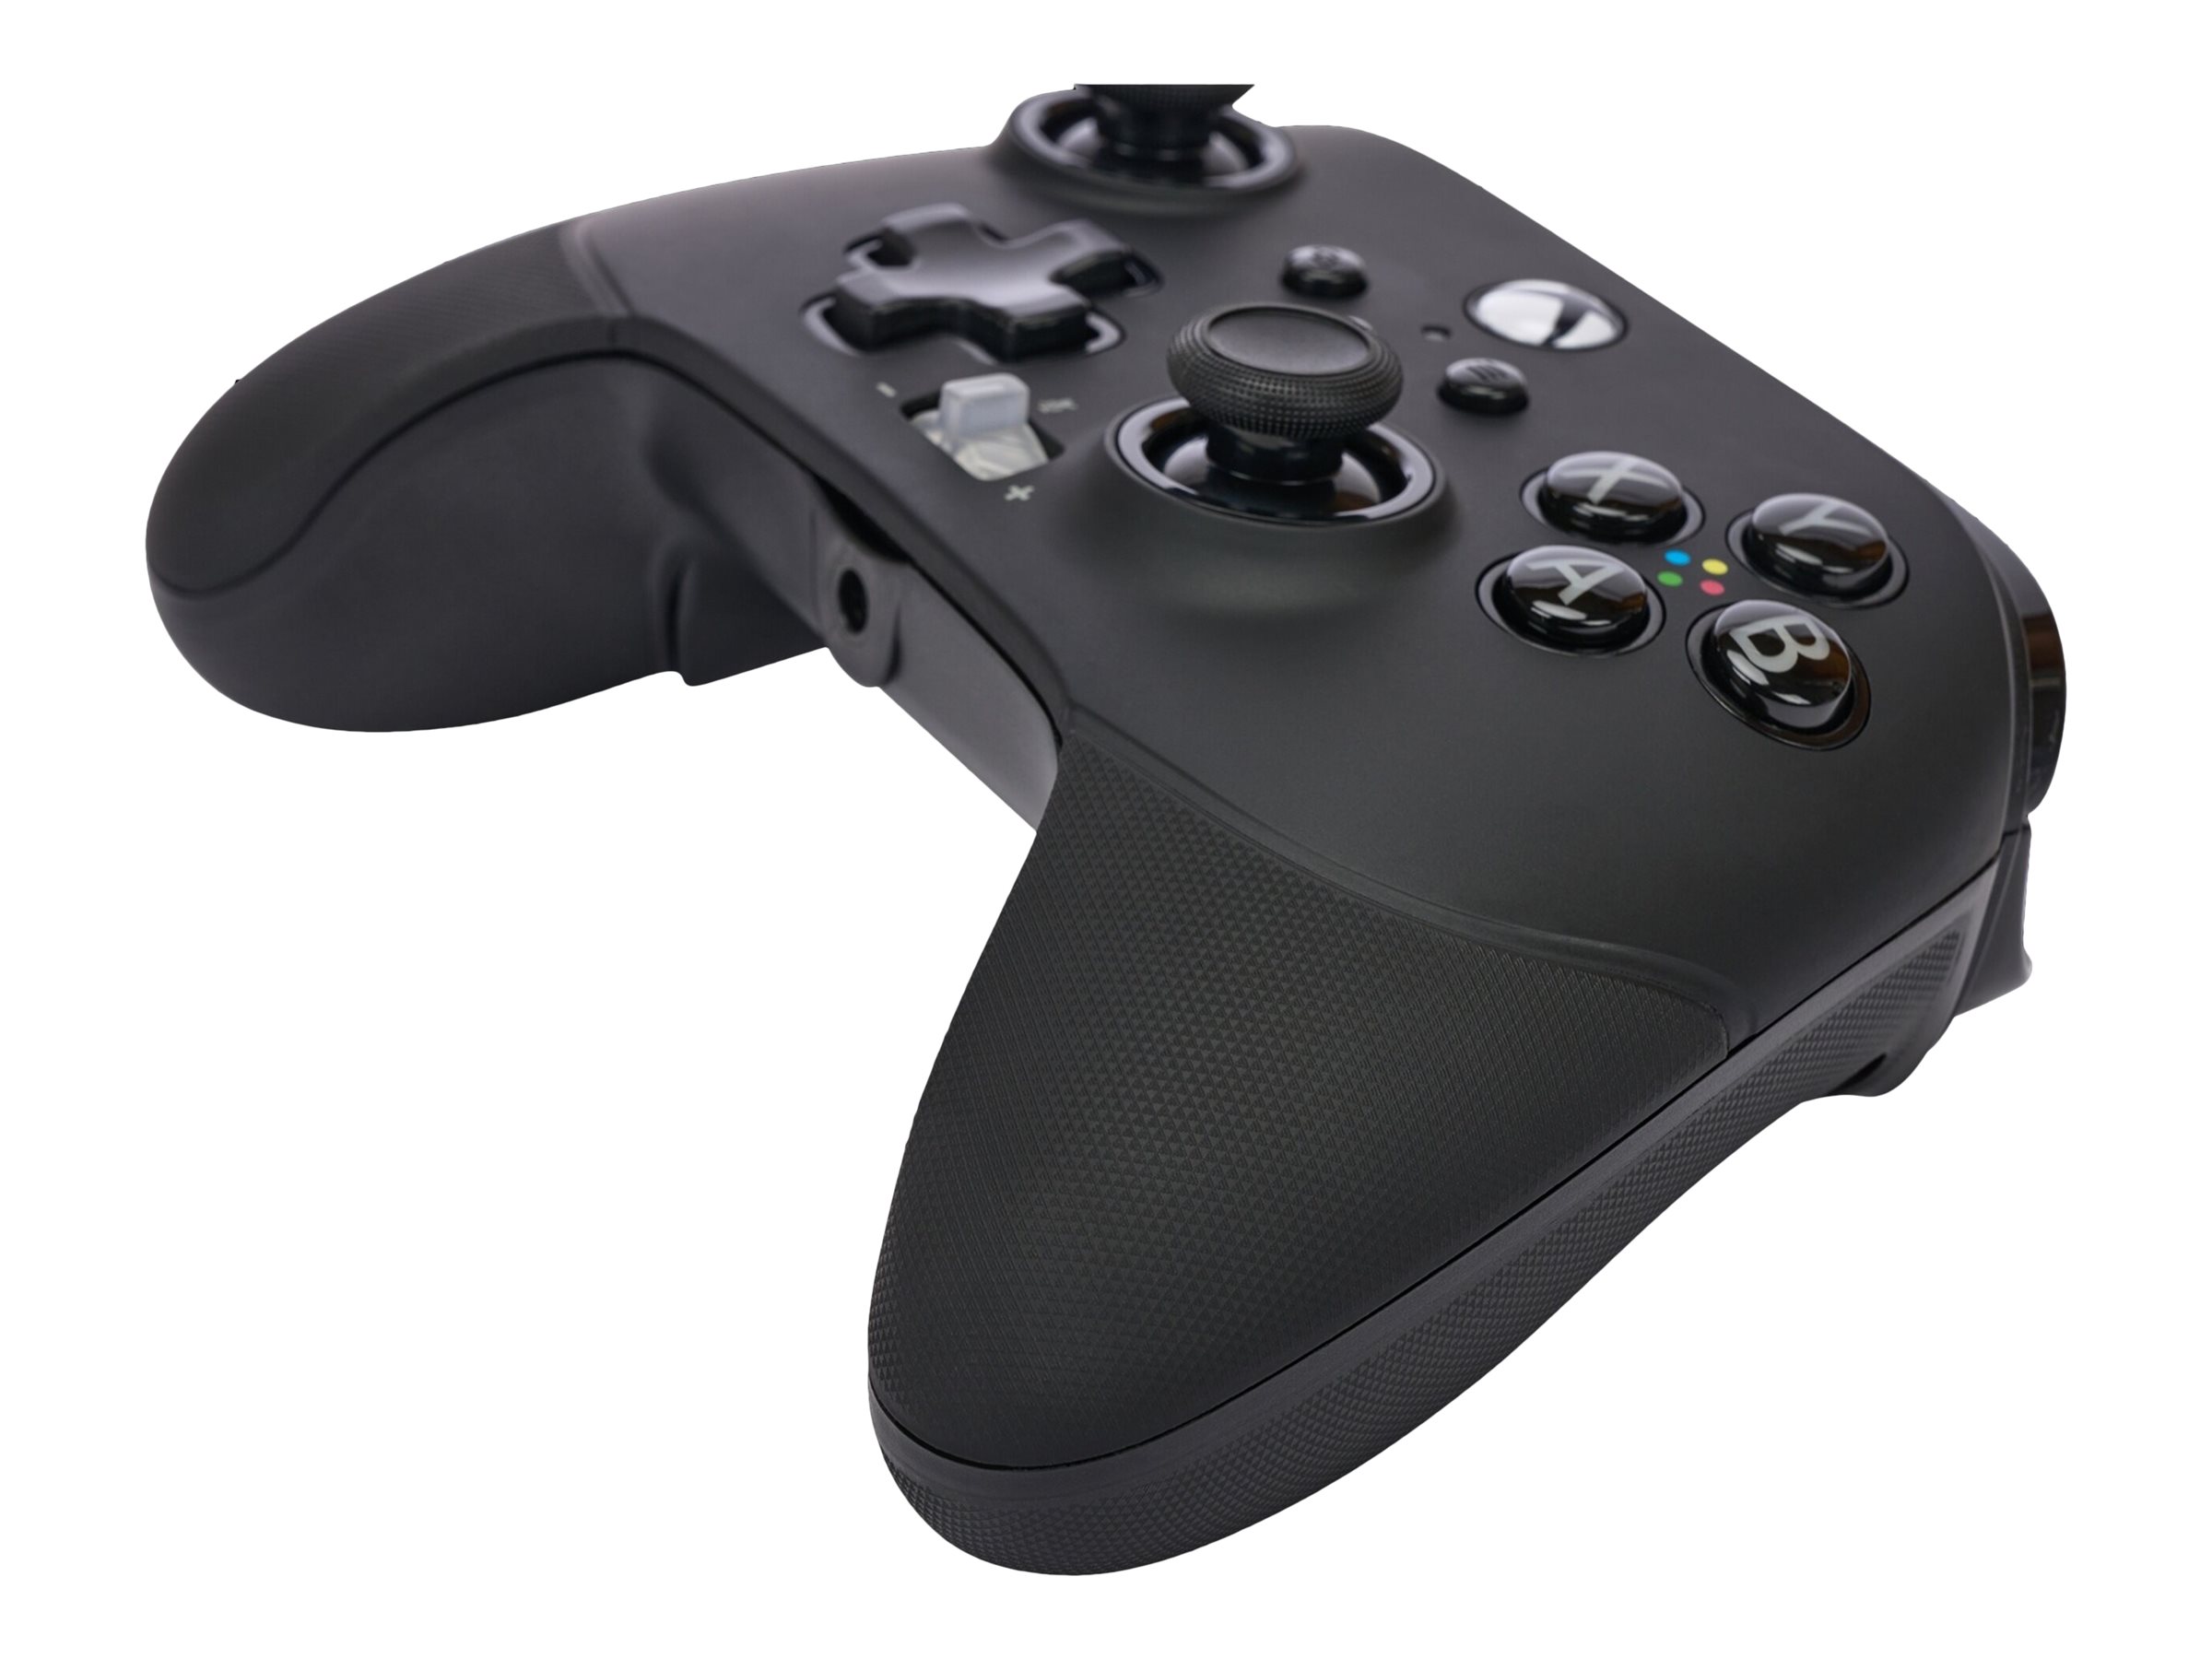 PowerA's customizable FUSION Pro 2 wired controller for Series X